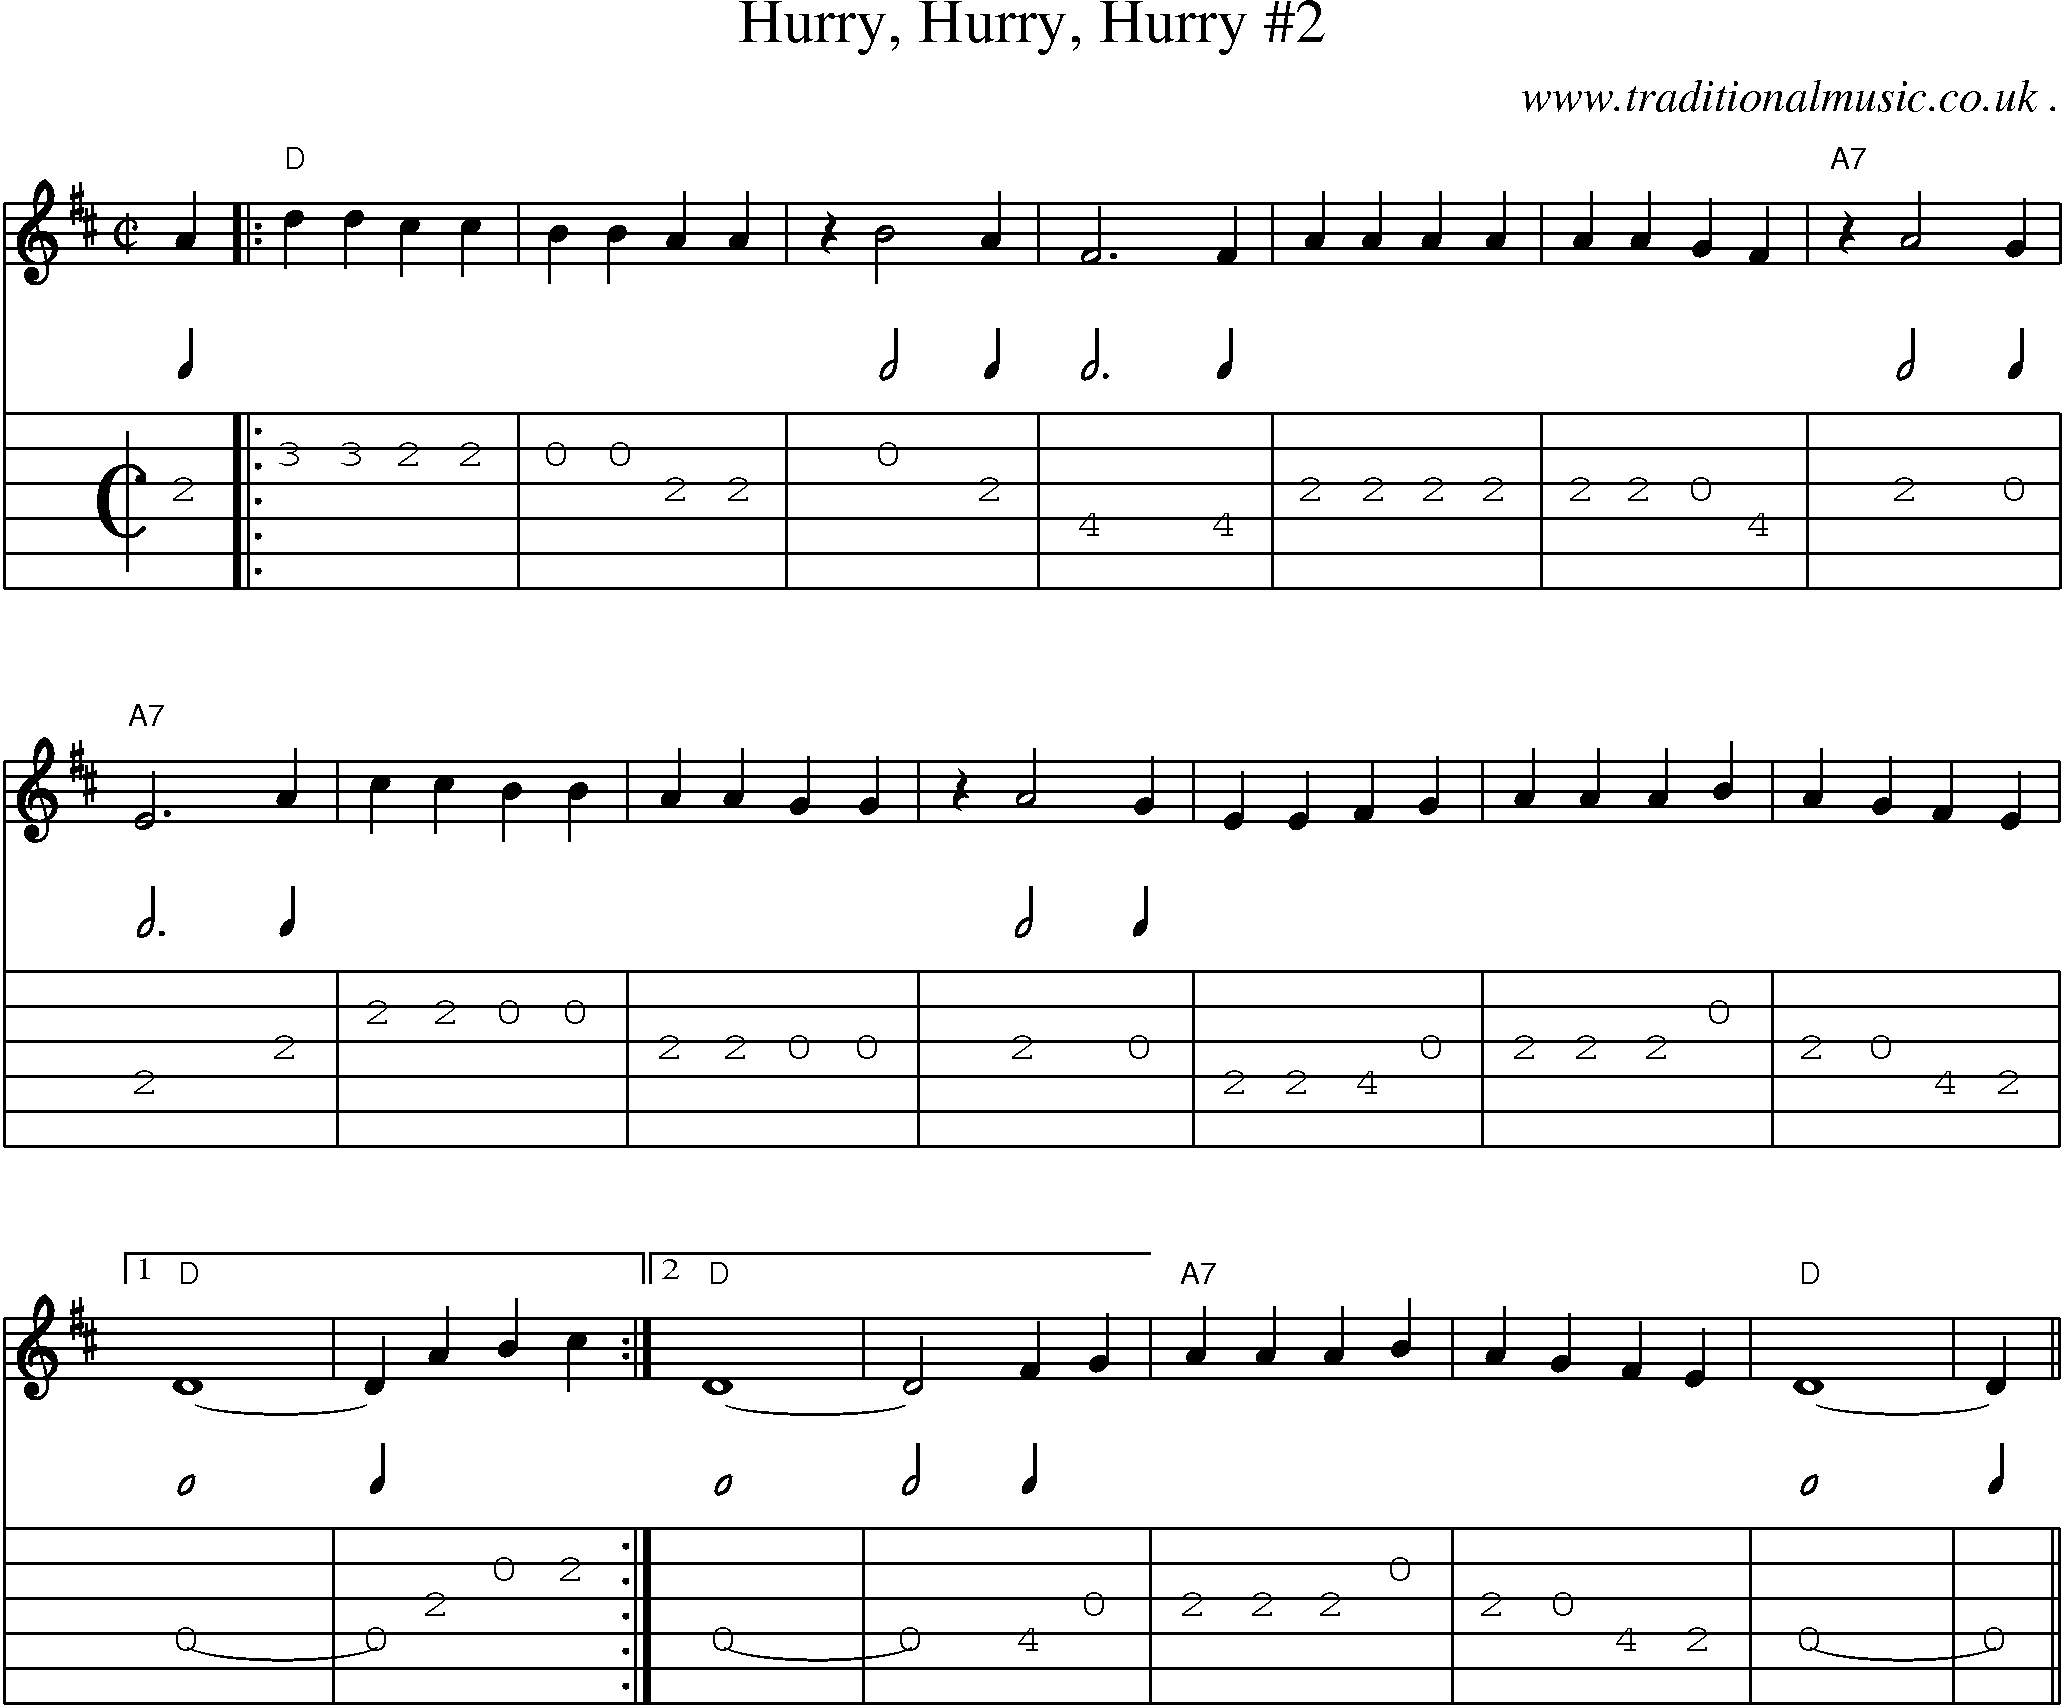 Music Score and Guitar Tabs for Hurry Hurry Hurry 2